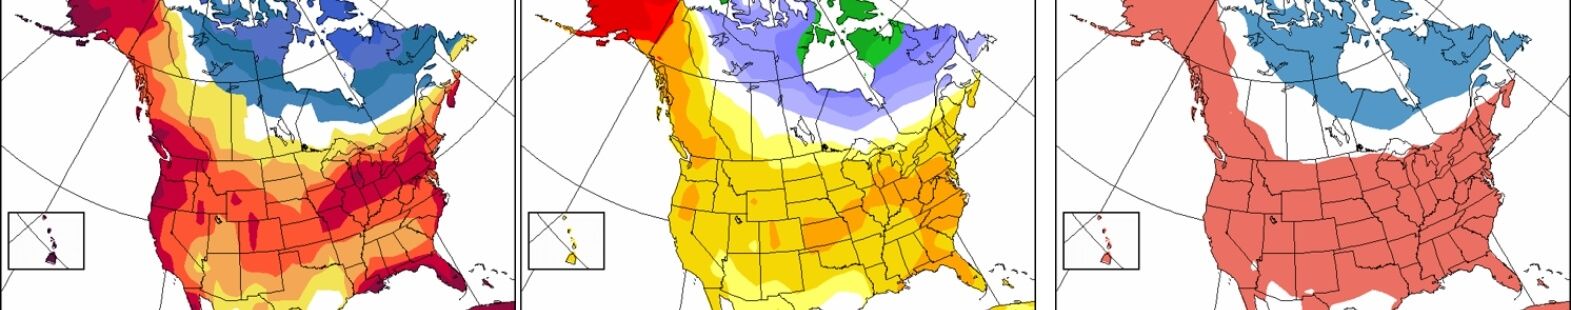 banner image showing 3 maps of a seasonal forecast for north america based on CanSIPS and CFSv2 combined forecasts.